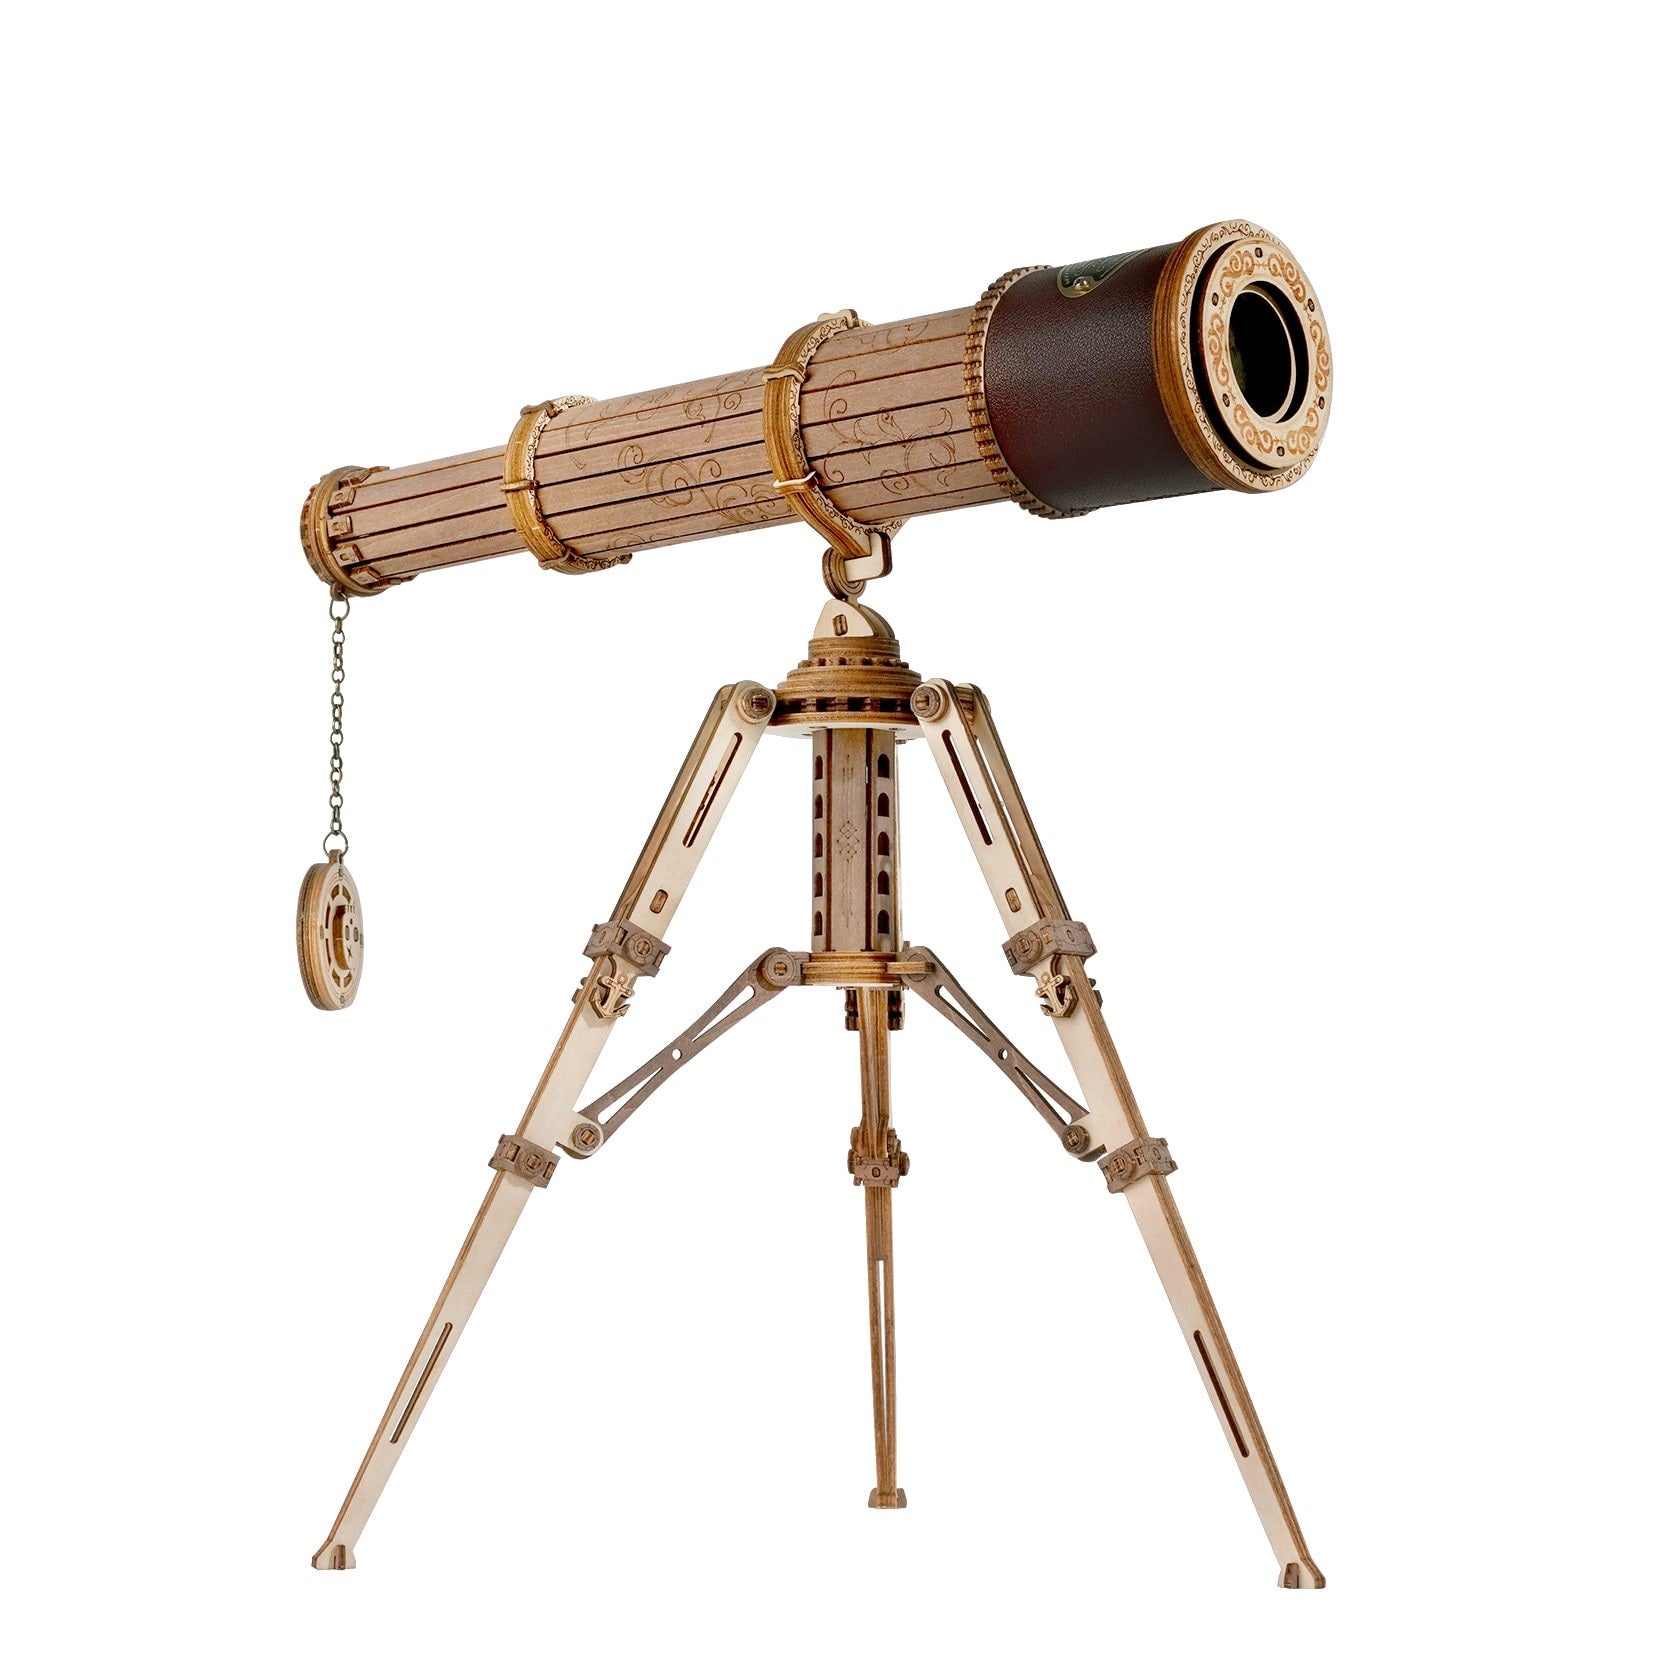 314pcs Telescopic Monocular Telescope Wooden Model Building Kits Assembly Toy Gift for Children Adult